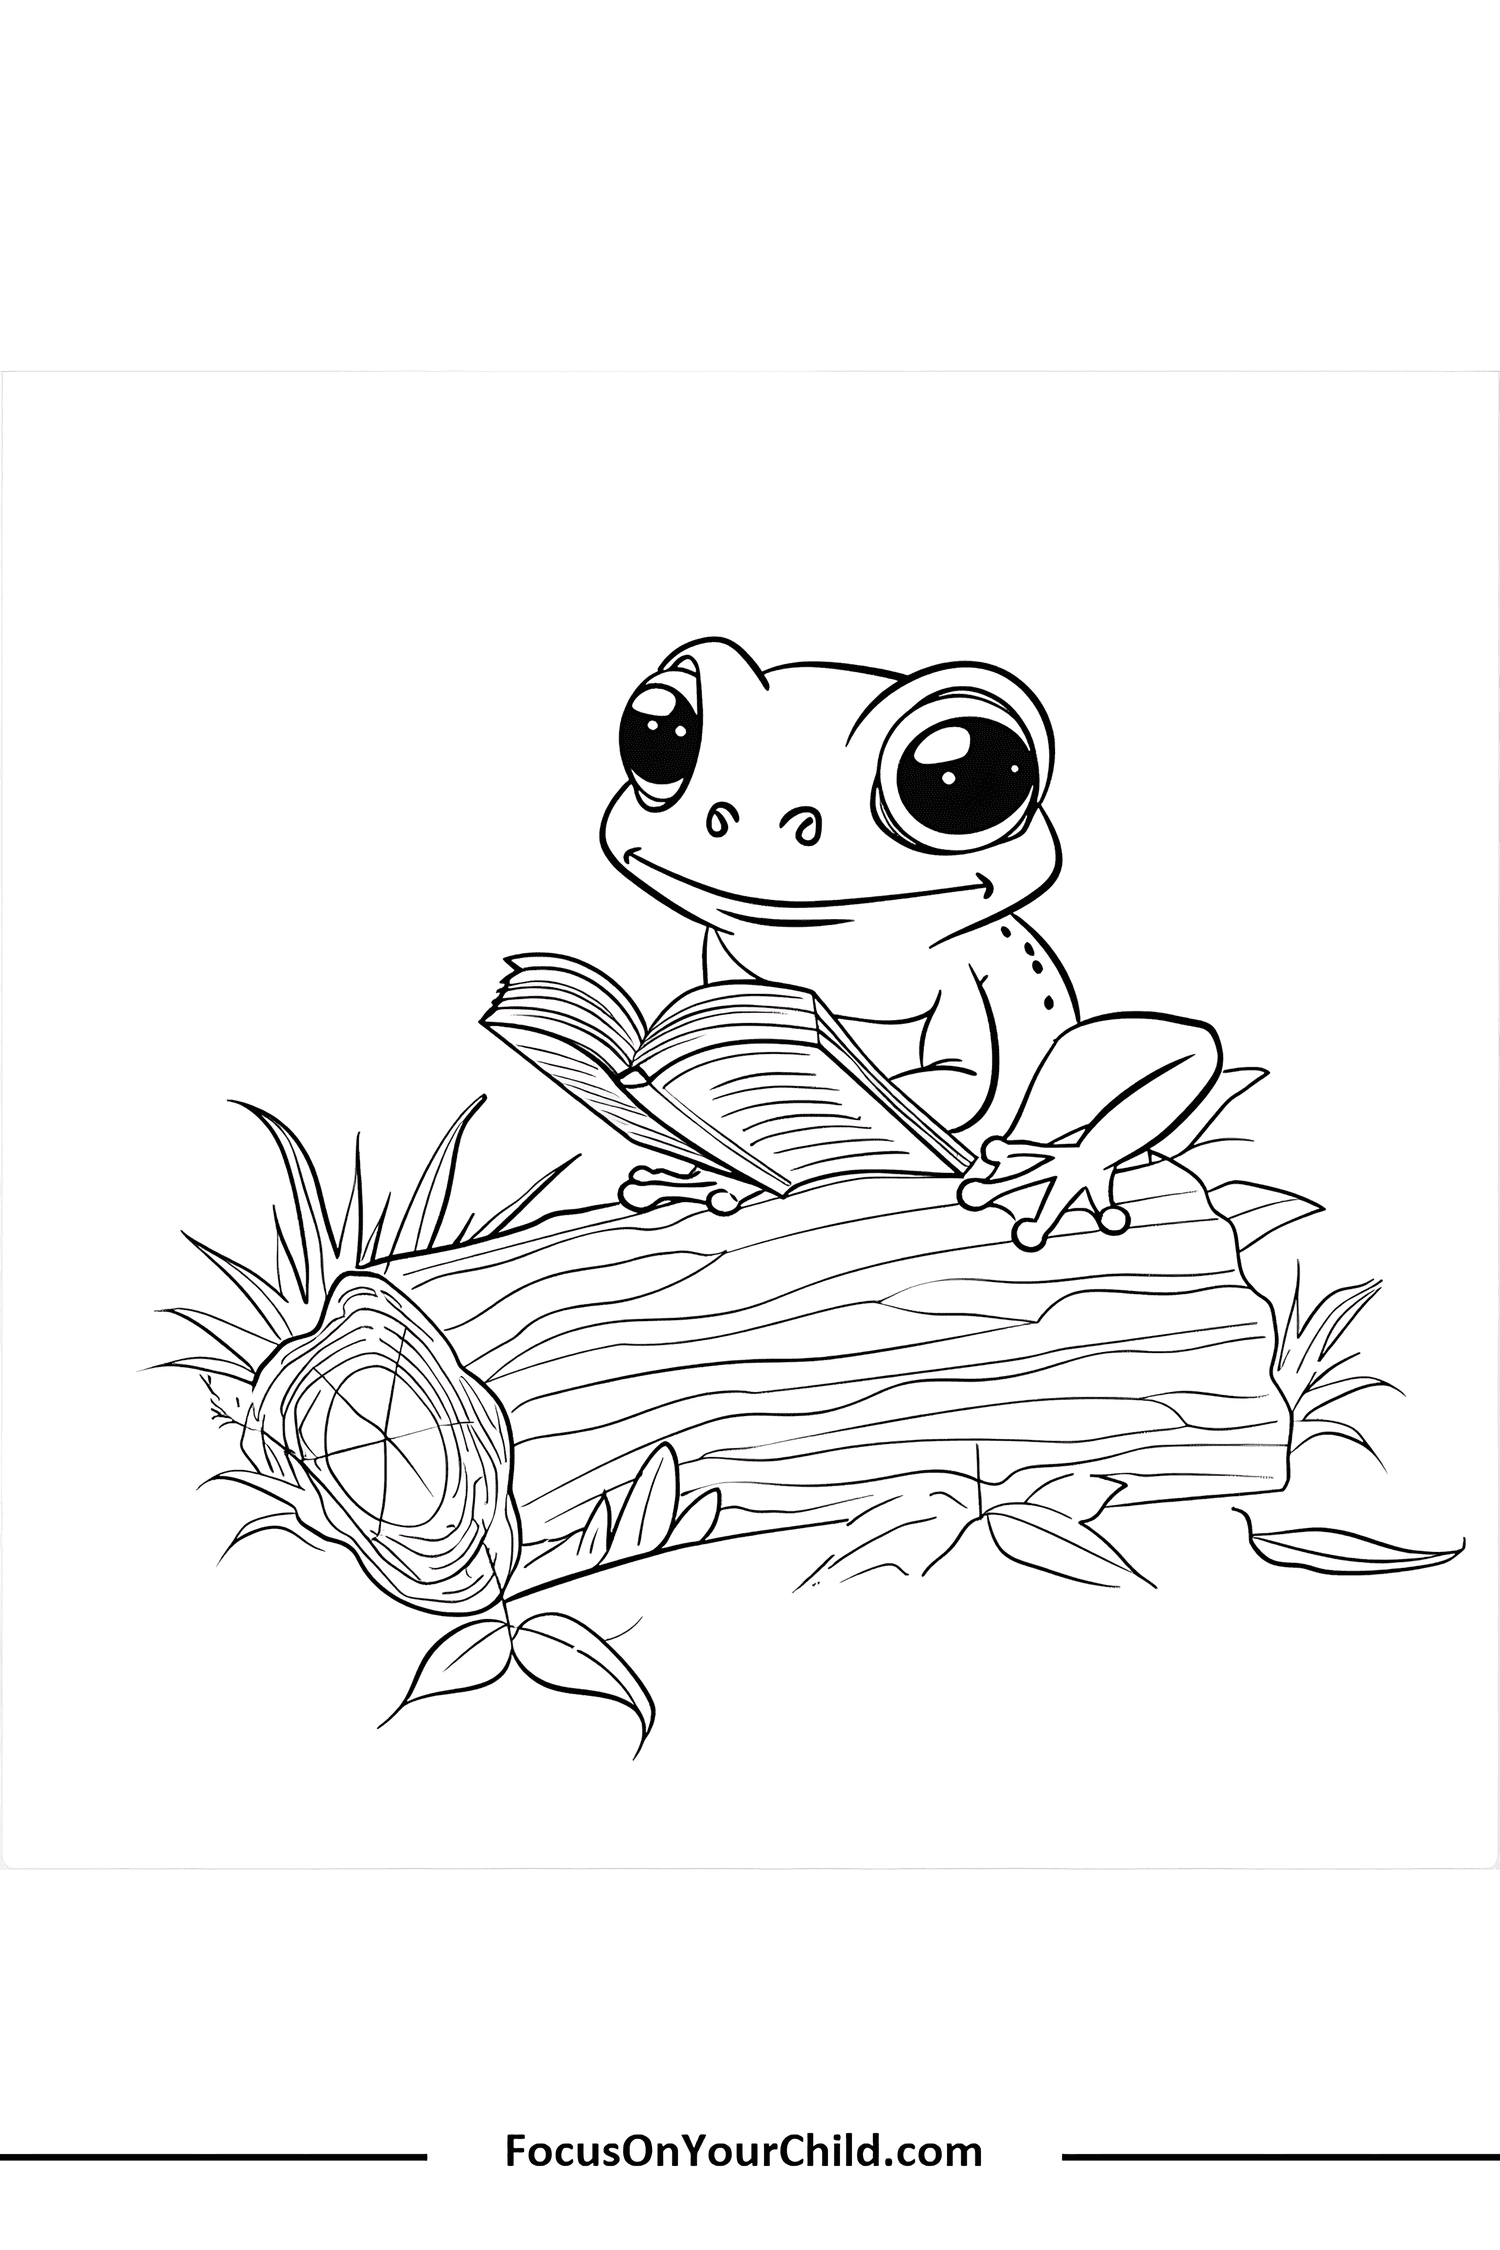 Charming frog reading a book on a log in a forest setting.